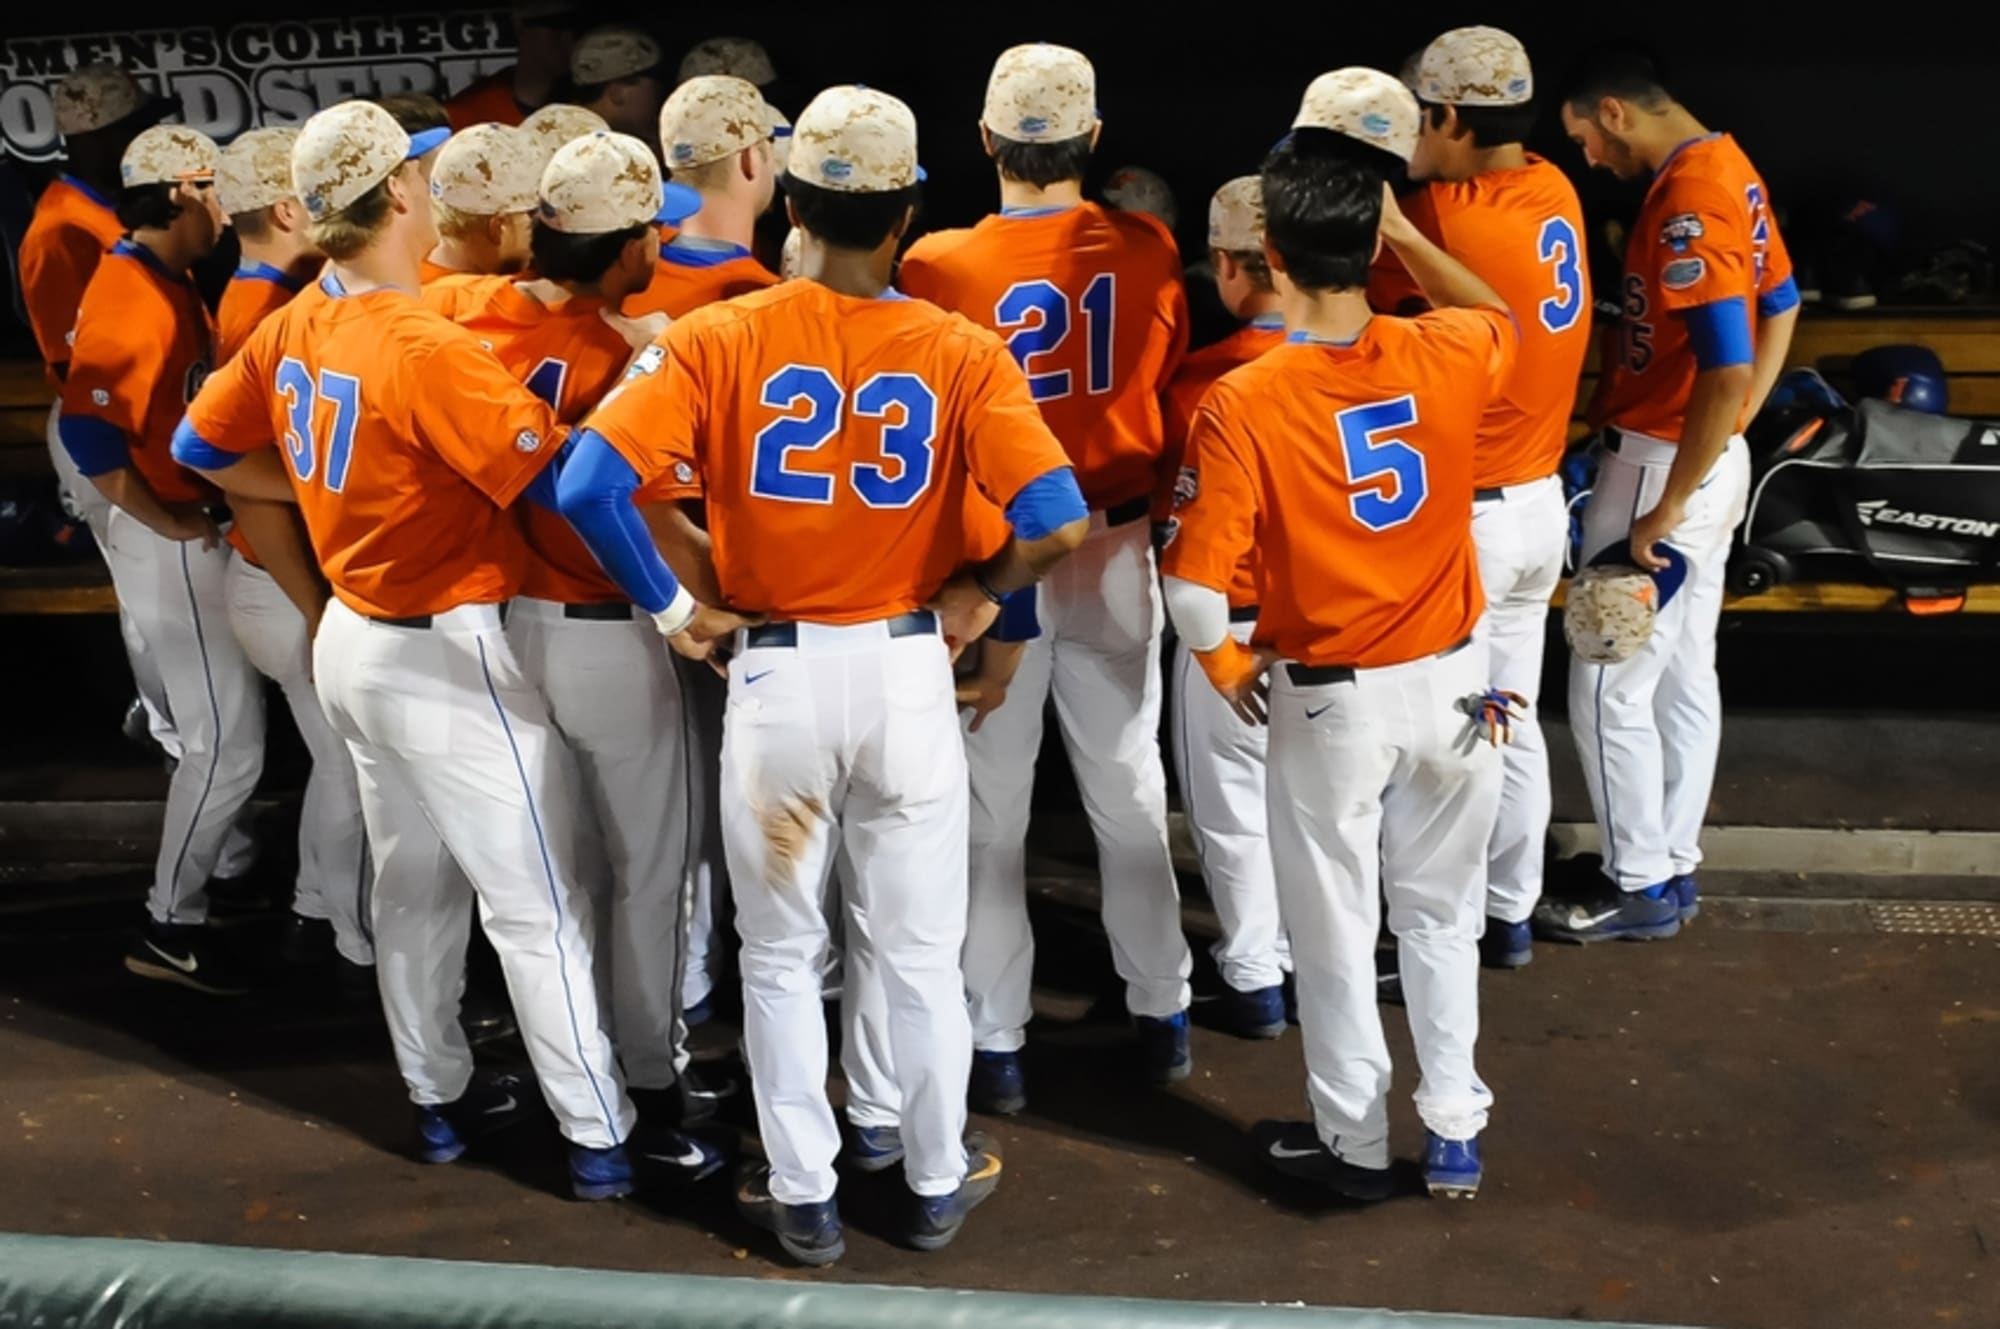 2016 Florida Gators Baseball Set Up for Disappointment